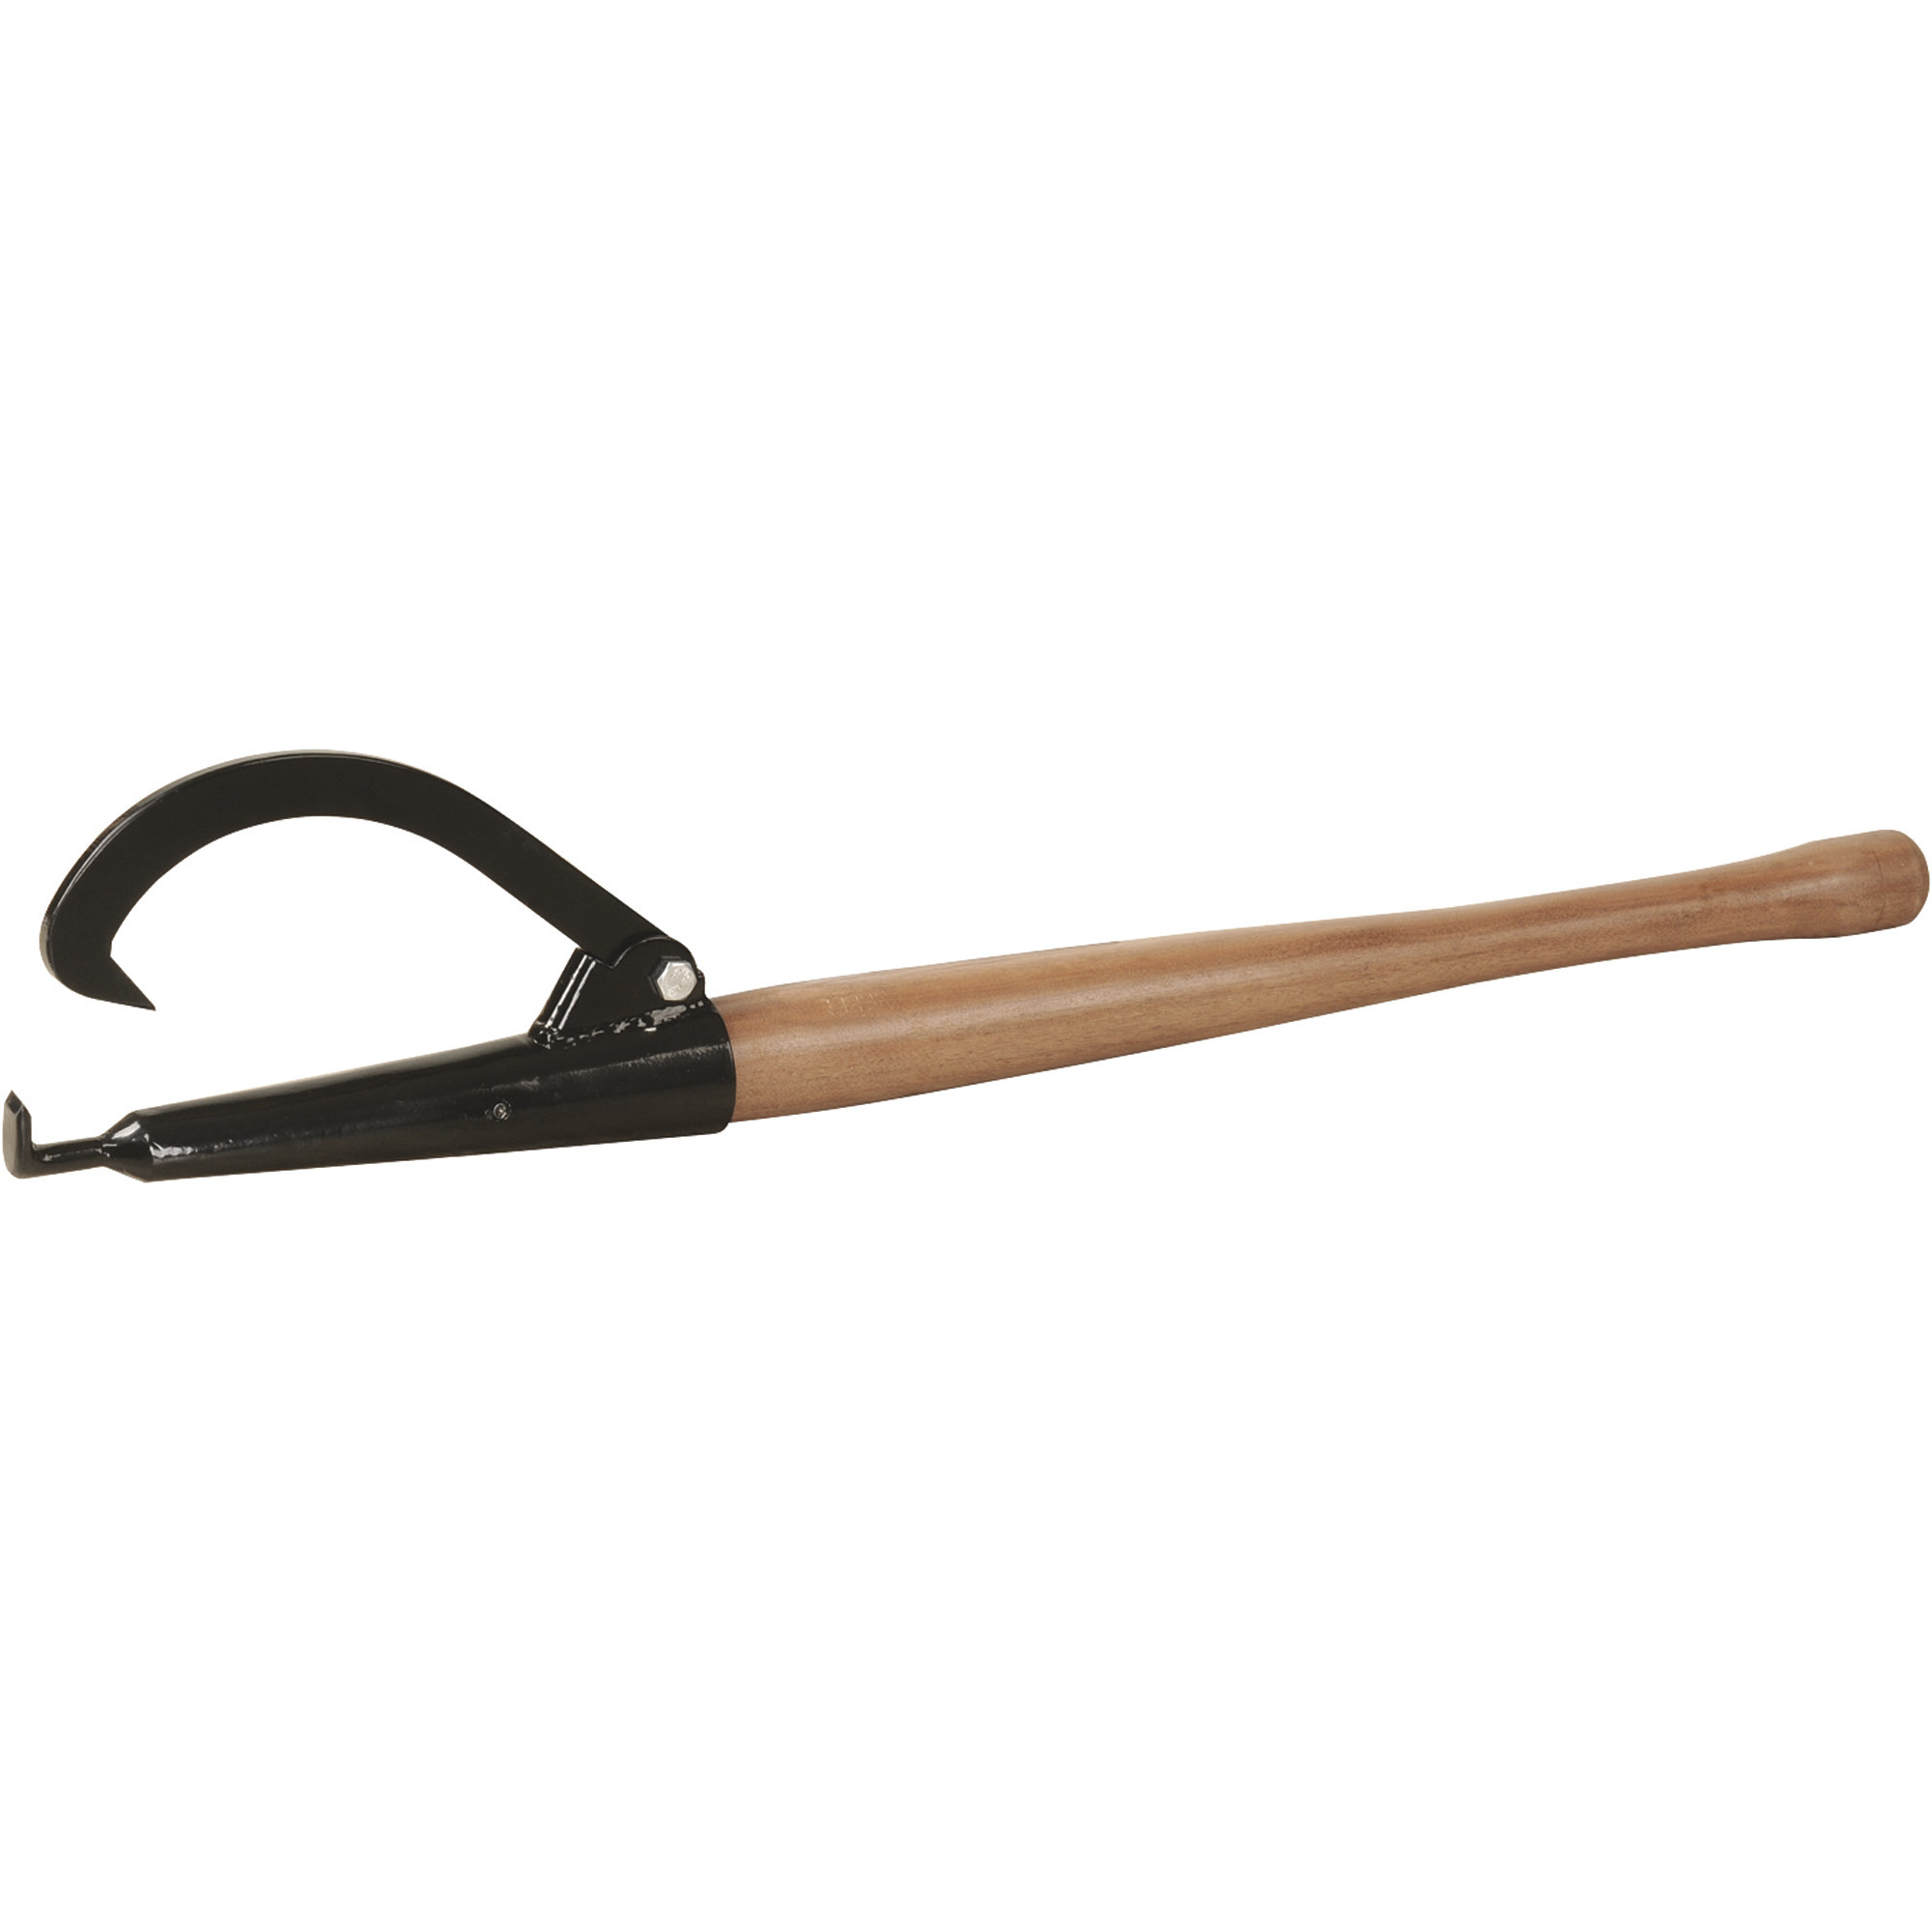 Ironton Wooden Handle Cant Hook, 48Inch L